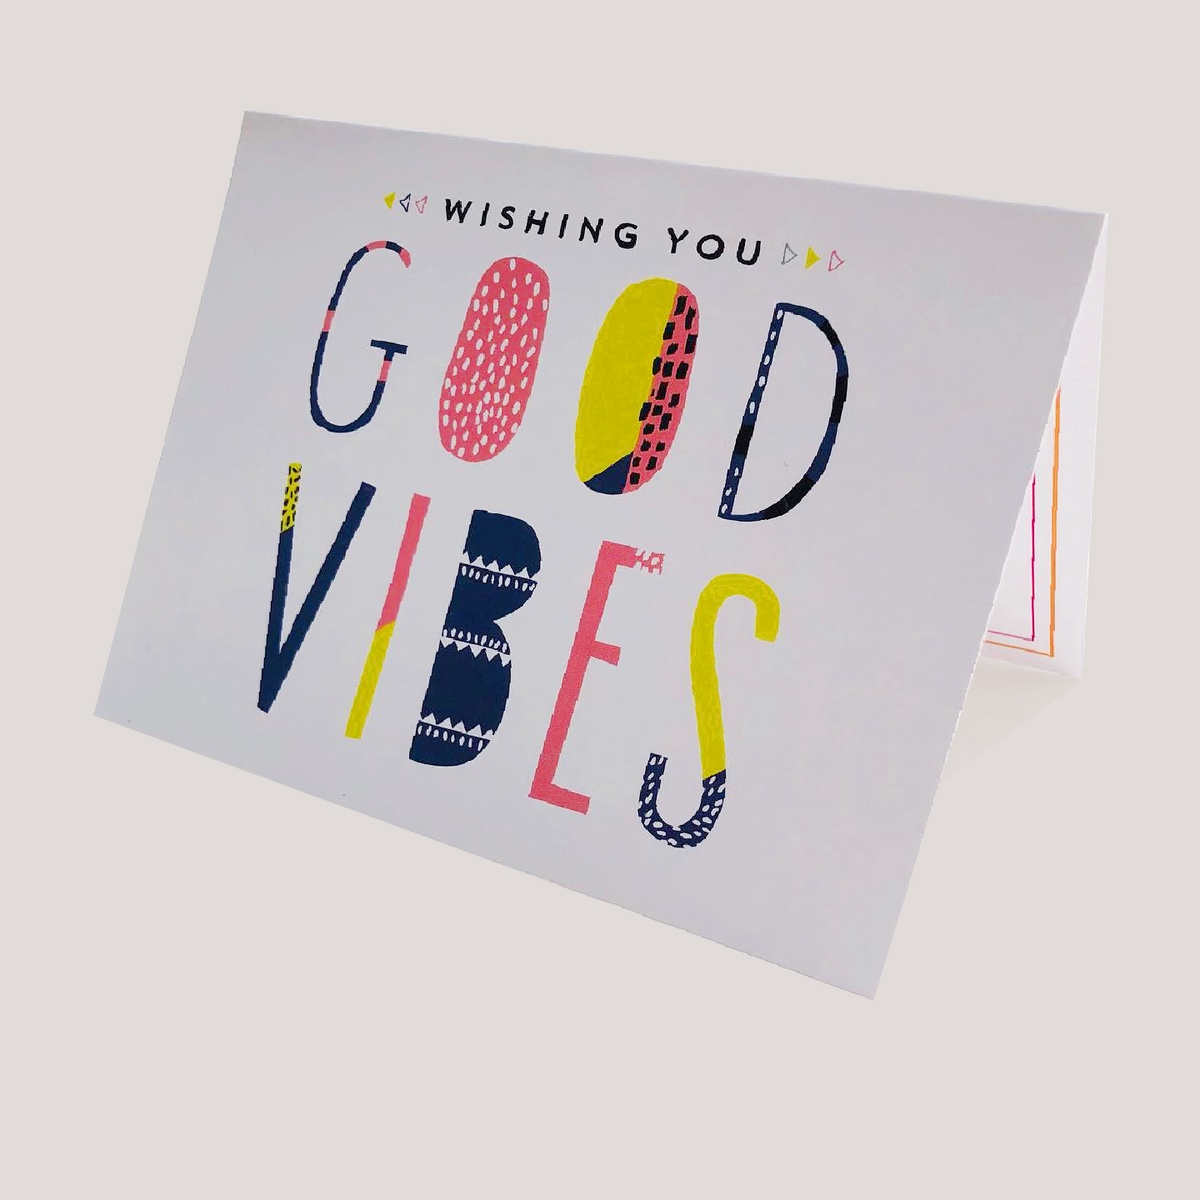 Spread Good Vibes with Sienna & Slate's "Wishing You Good Vibes" Card